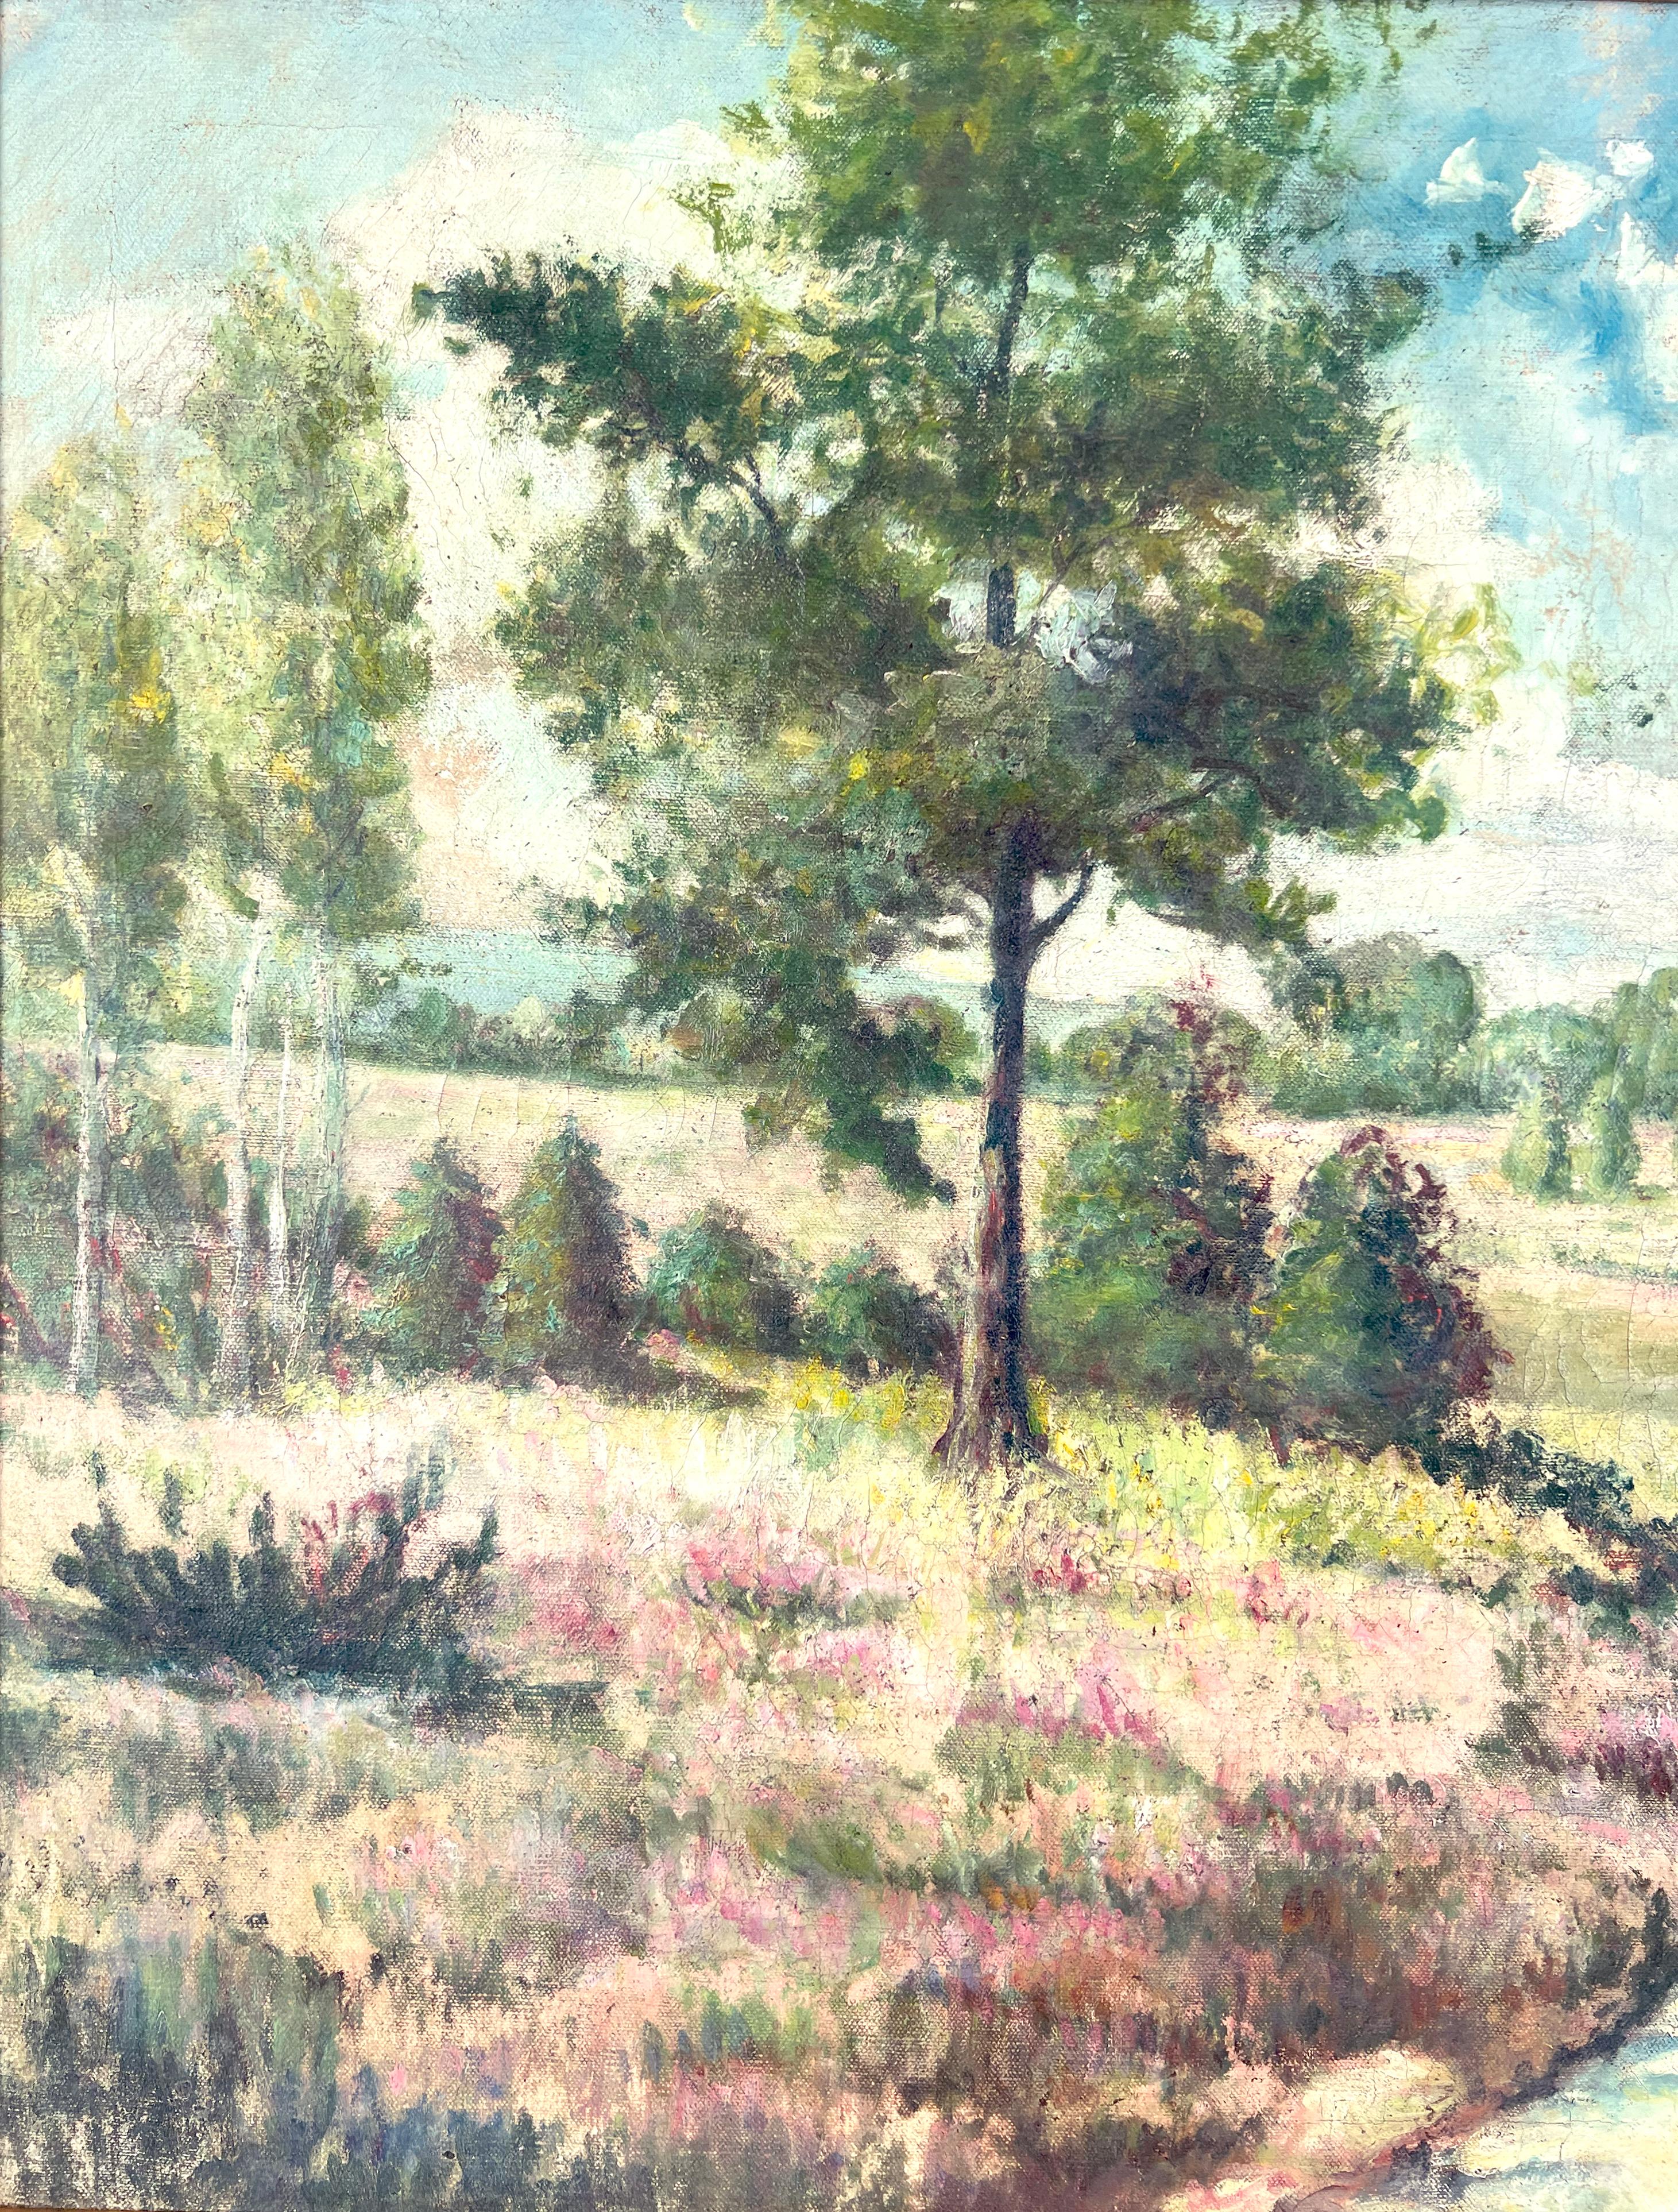 Arley - Staffordshire Heights England Landscape and Meadows by Melin - Impressionist Painting by A. Melin